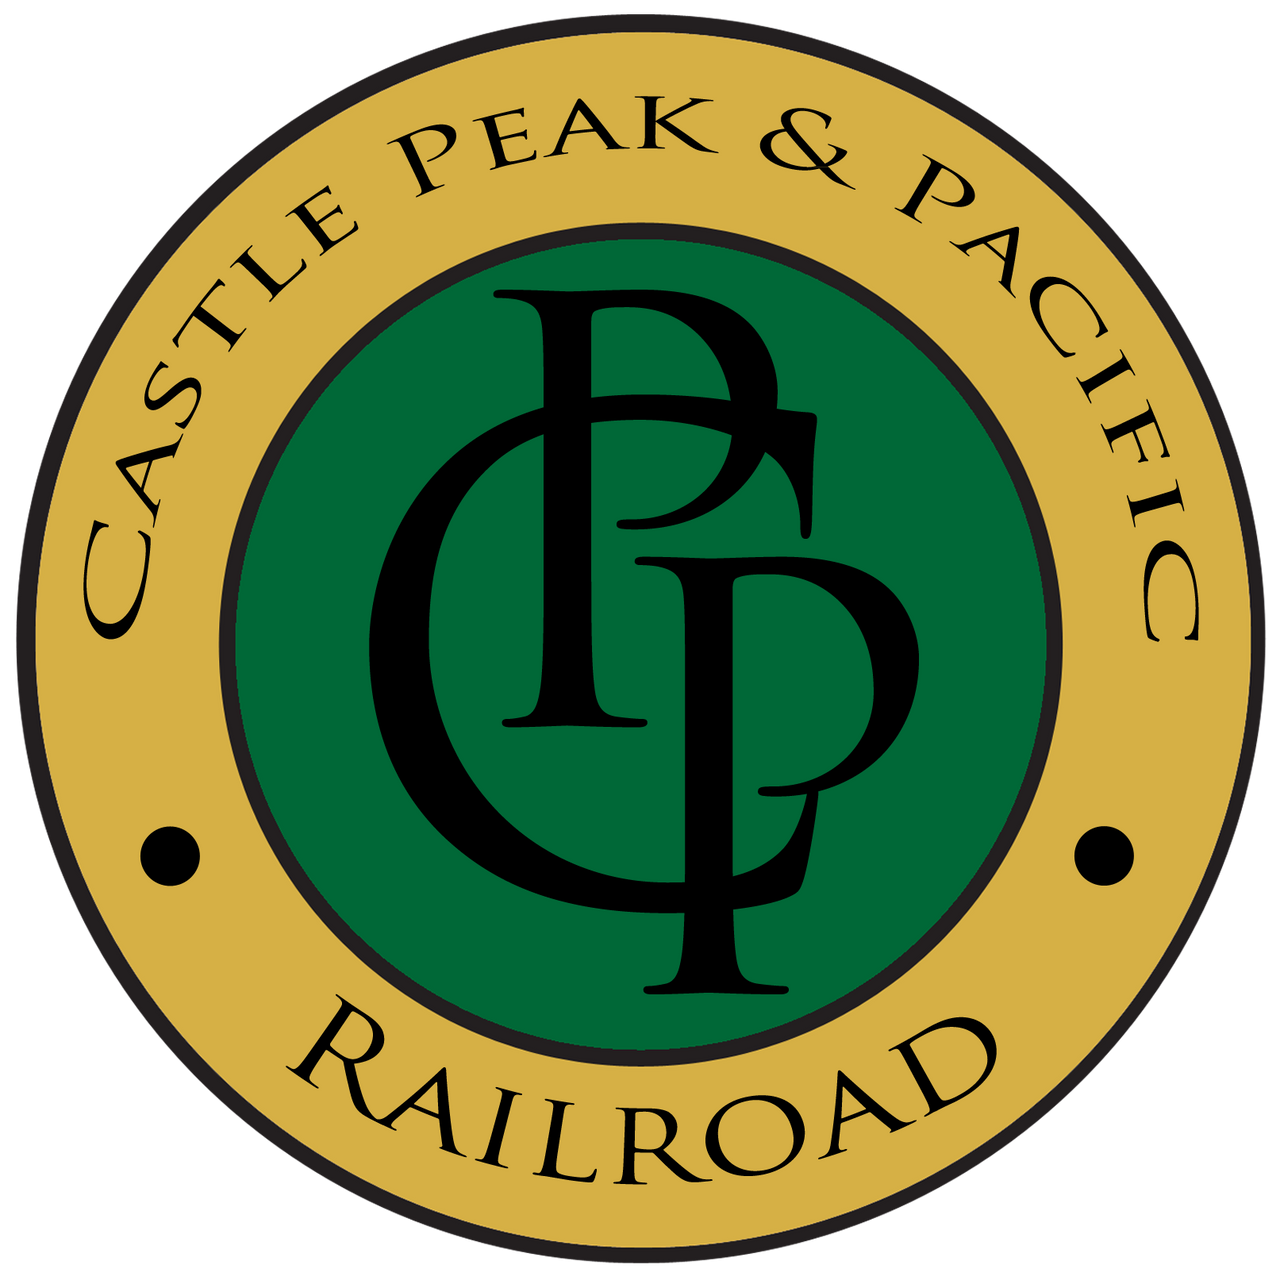 castle_peak_and_pacific_herald___nov_13_22_by_rogueranger1993_dfhulg7-fullview.png